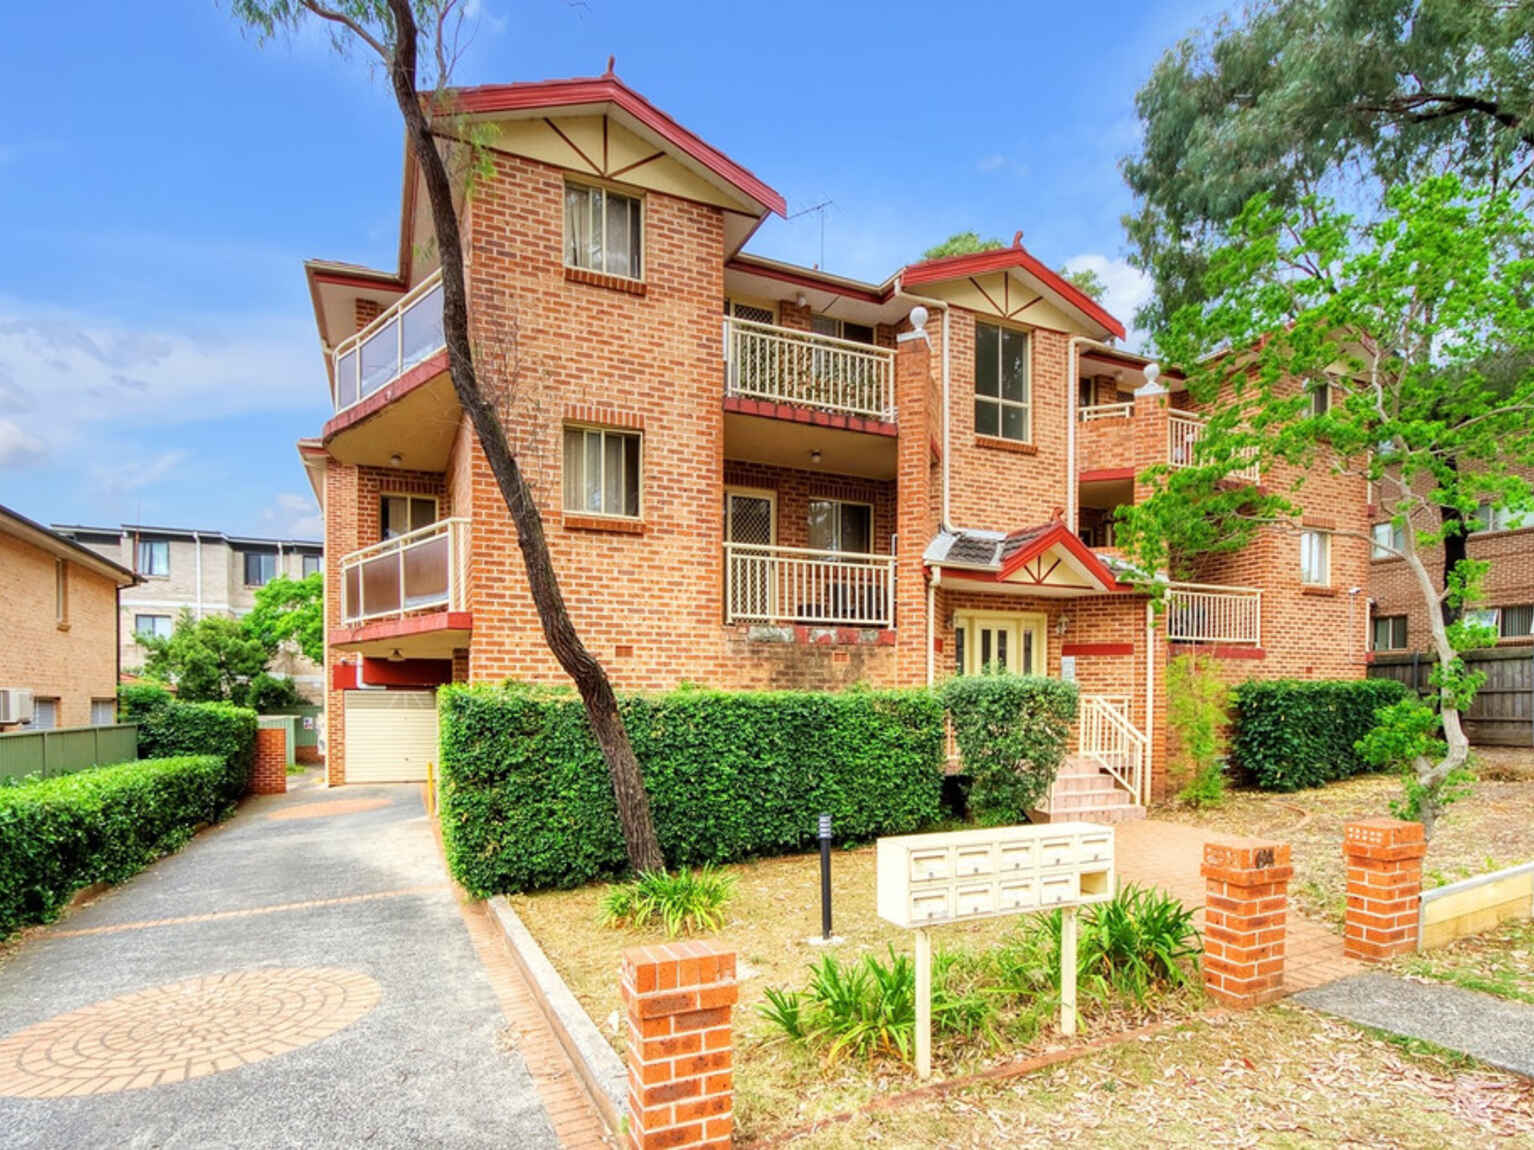 7/64 Clyde Street Guildford